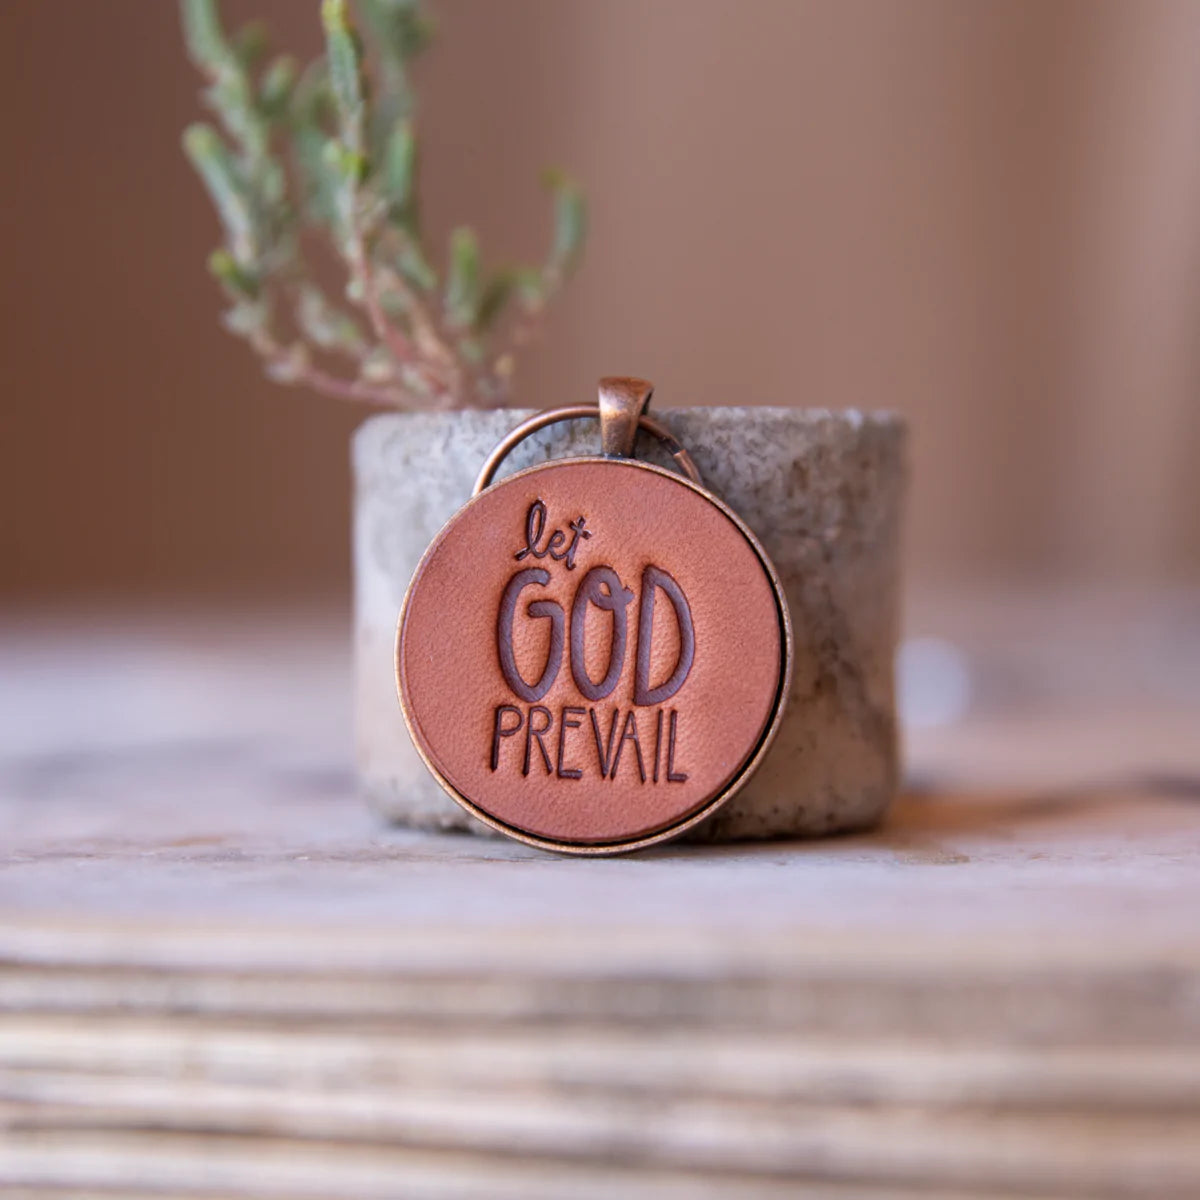 Let God Prevail Keychain - Lazy 3 Leather Company